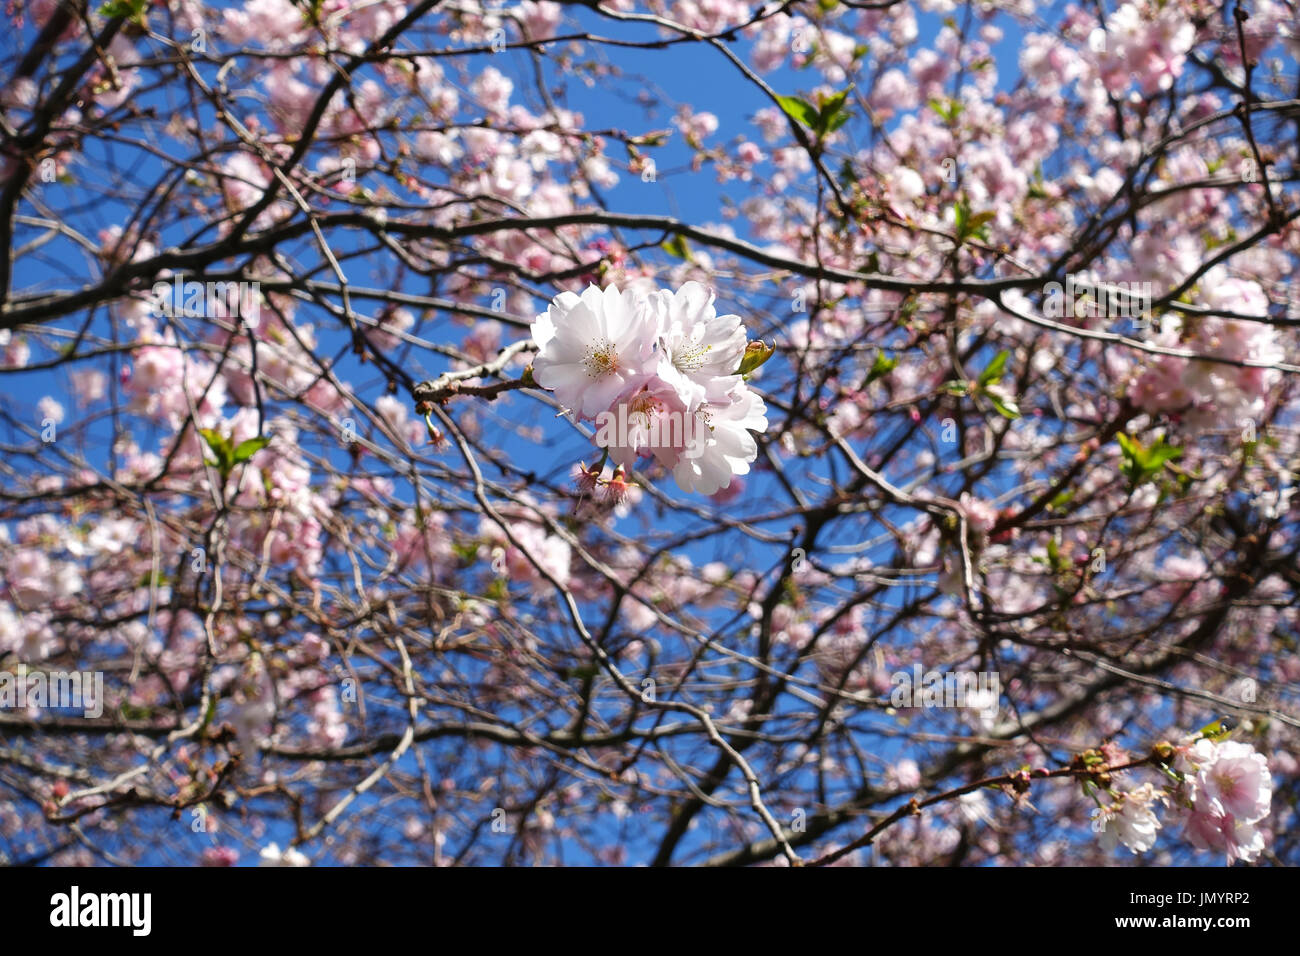 Close-up of pink Japanese cherry blossom Sakura flower growing on brown tree branches in the afternoon sun with clear blue sky. Stock Photo